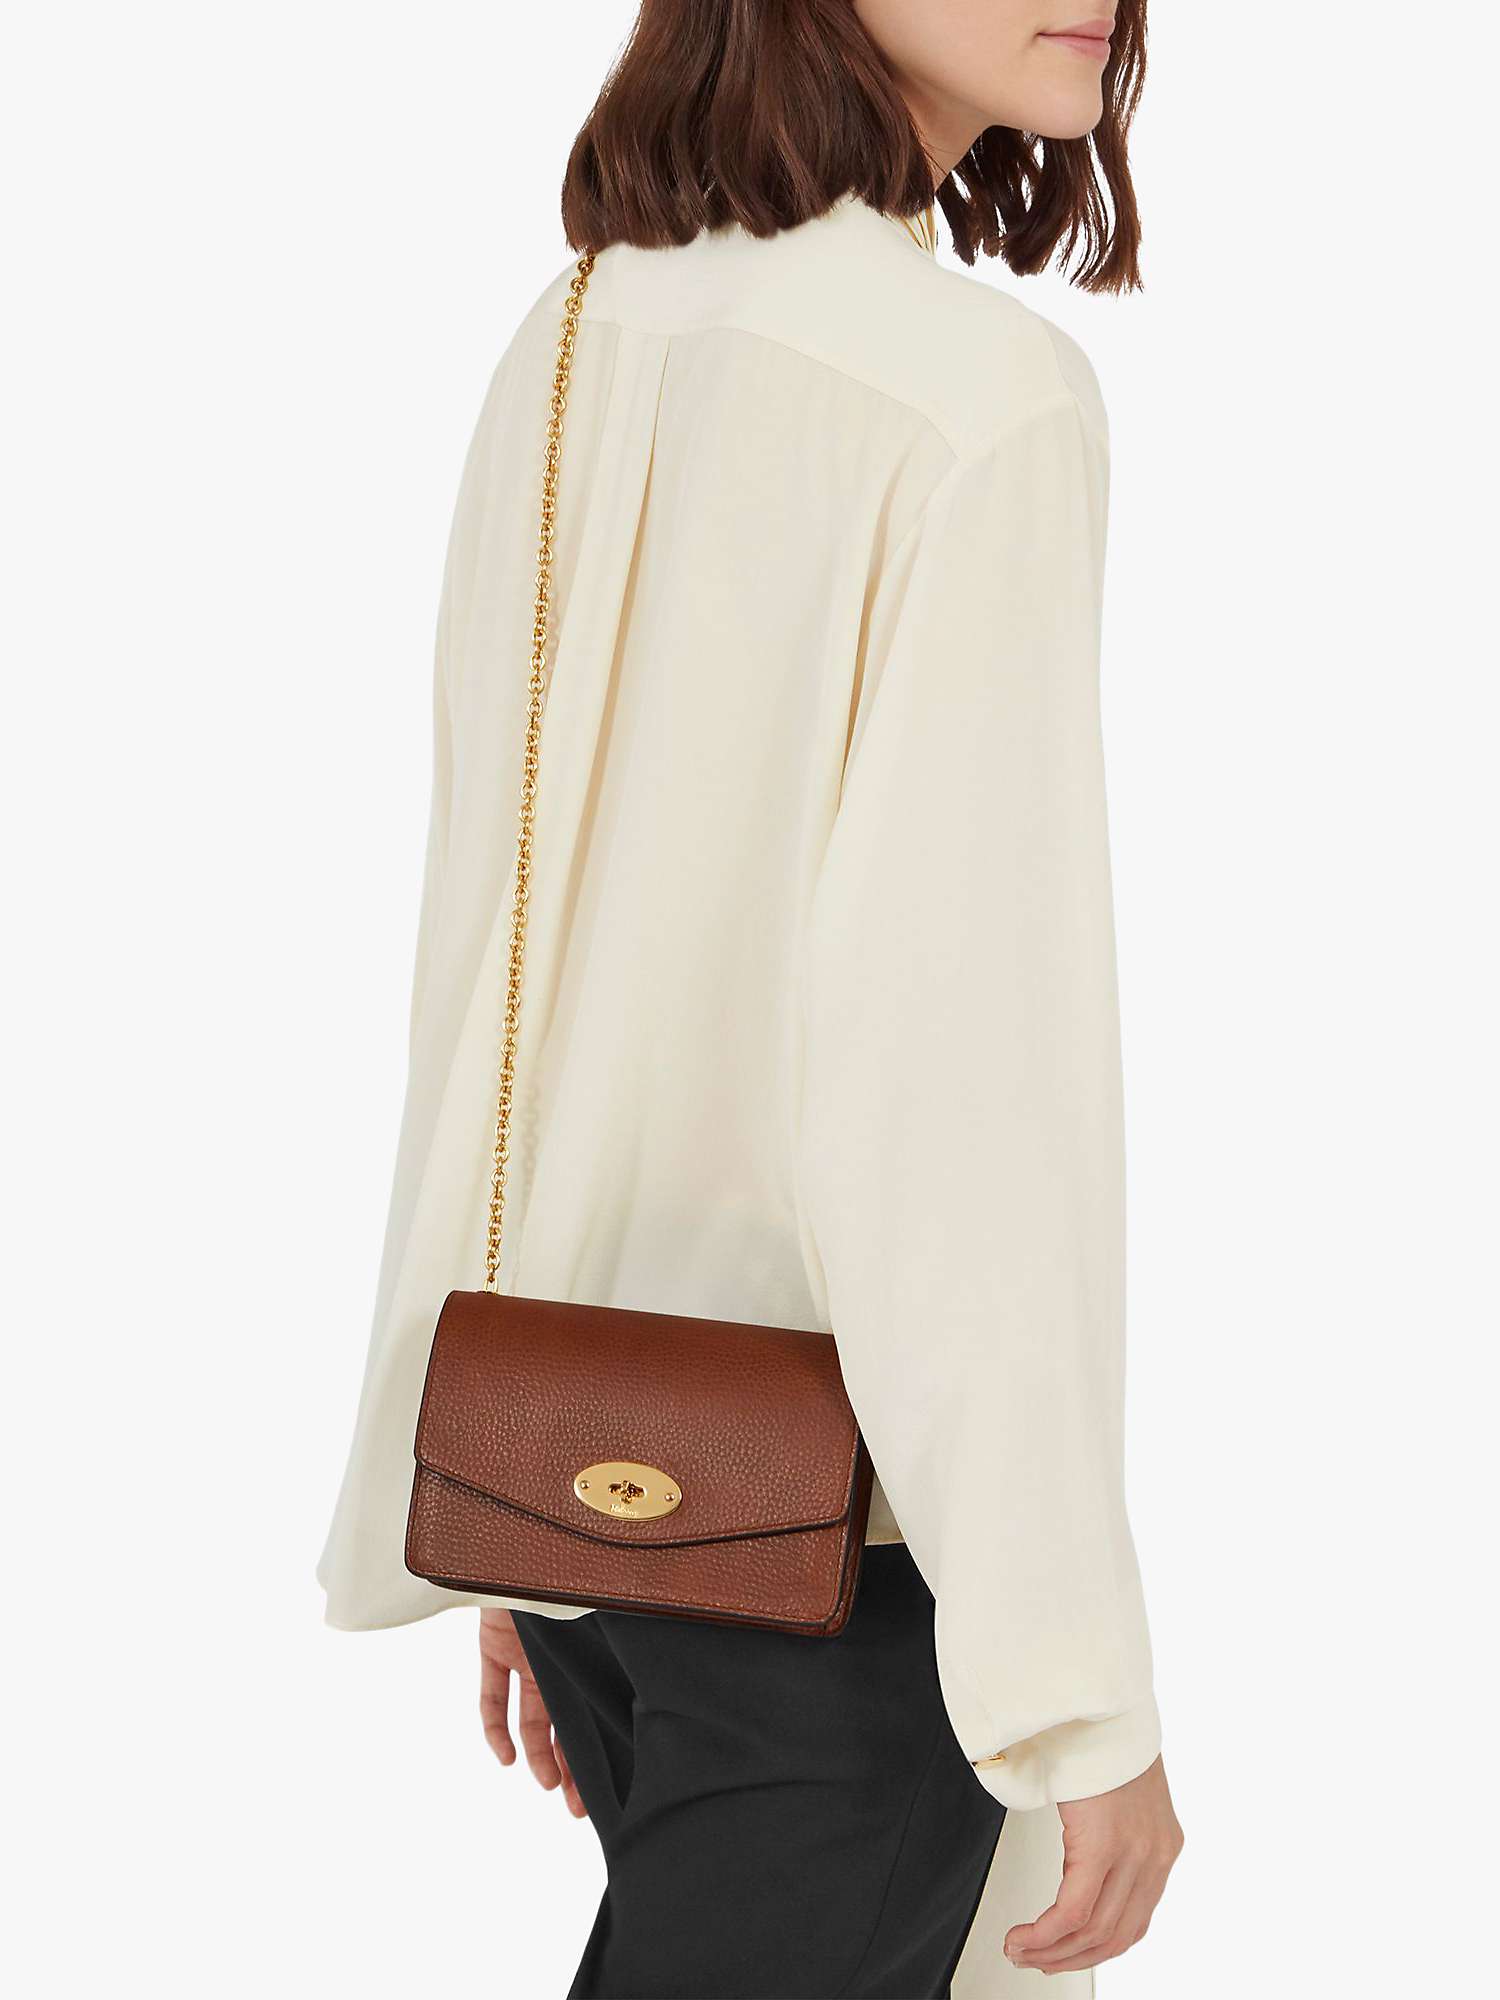 Buy Mulberry Small Darley Grain Veg Tanned Leather Cross Body Bag Online at johnlewis.com